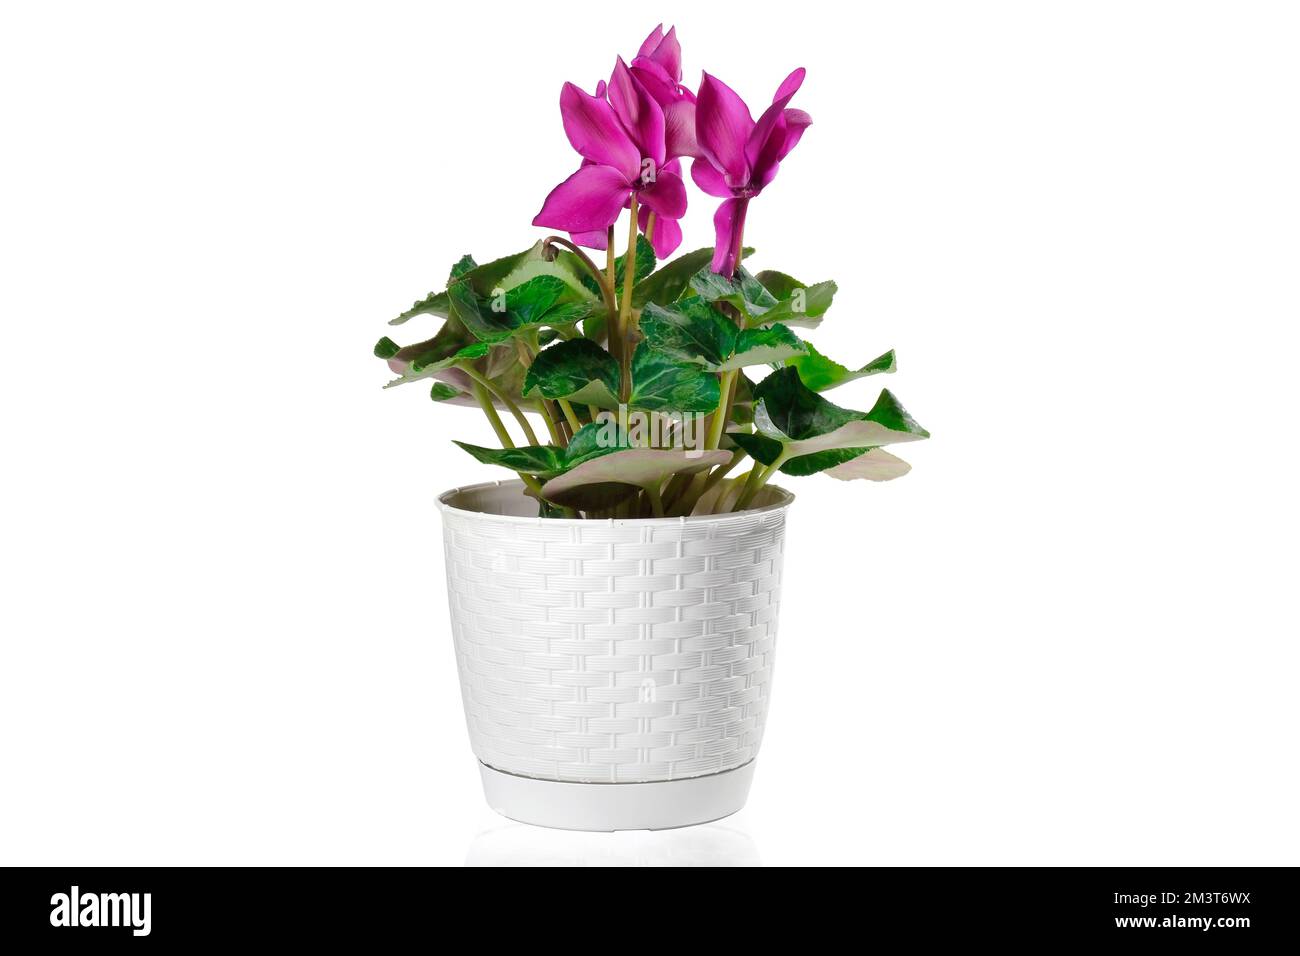 Pink cyclamen flower in a flower pot isolated on white background Stock Photo